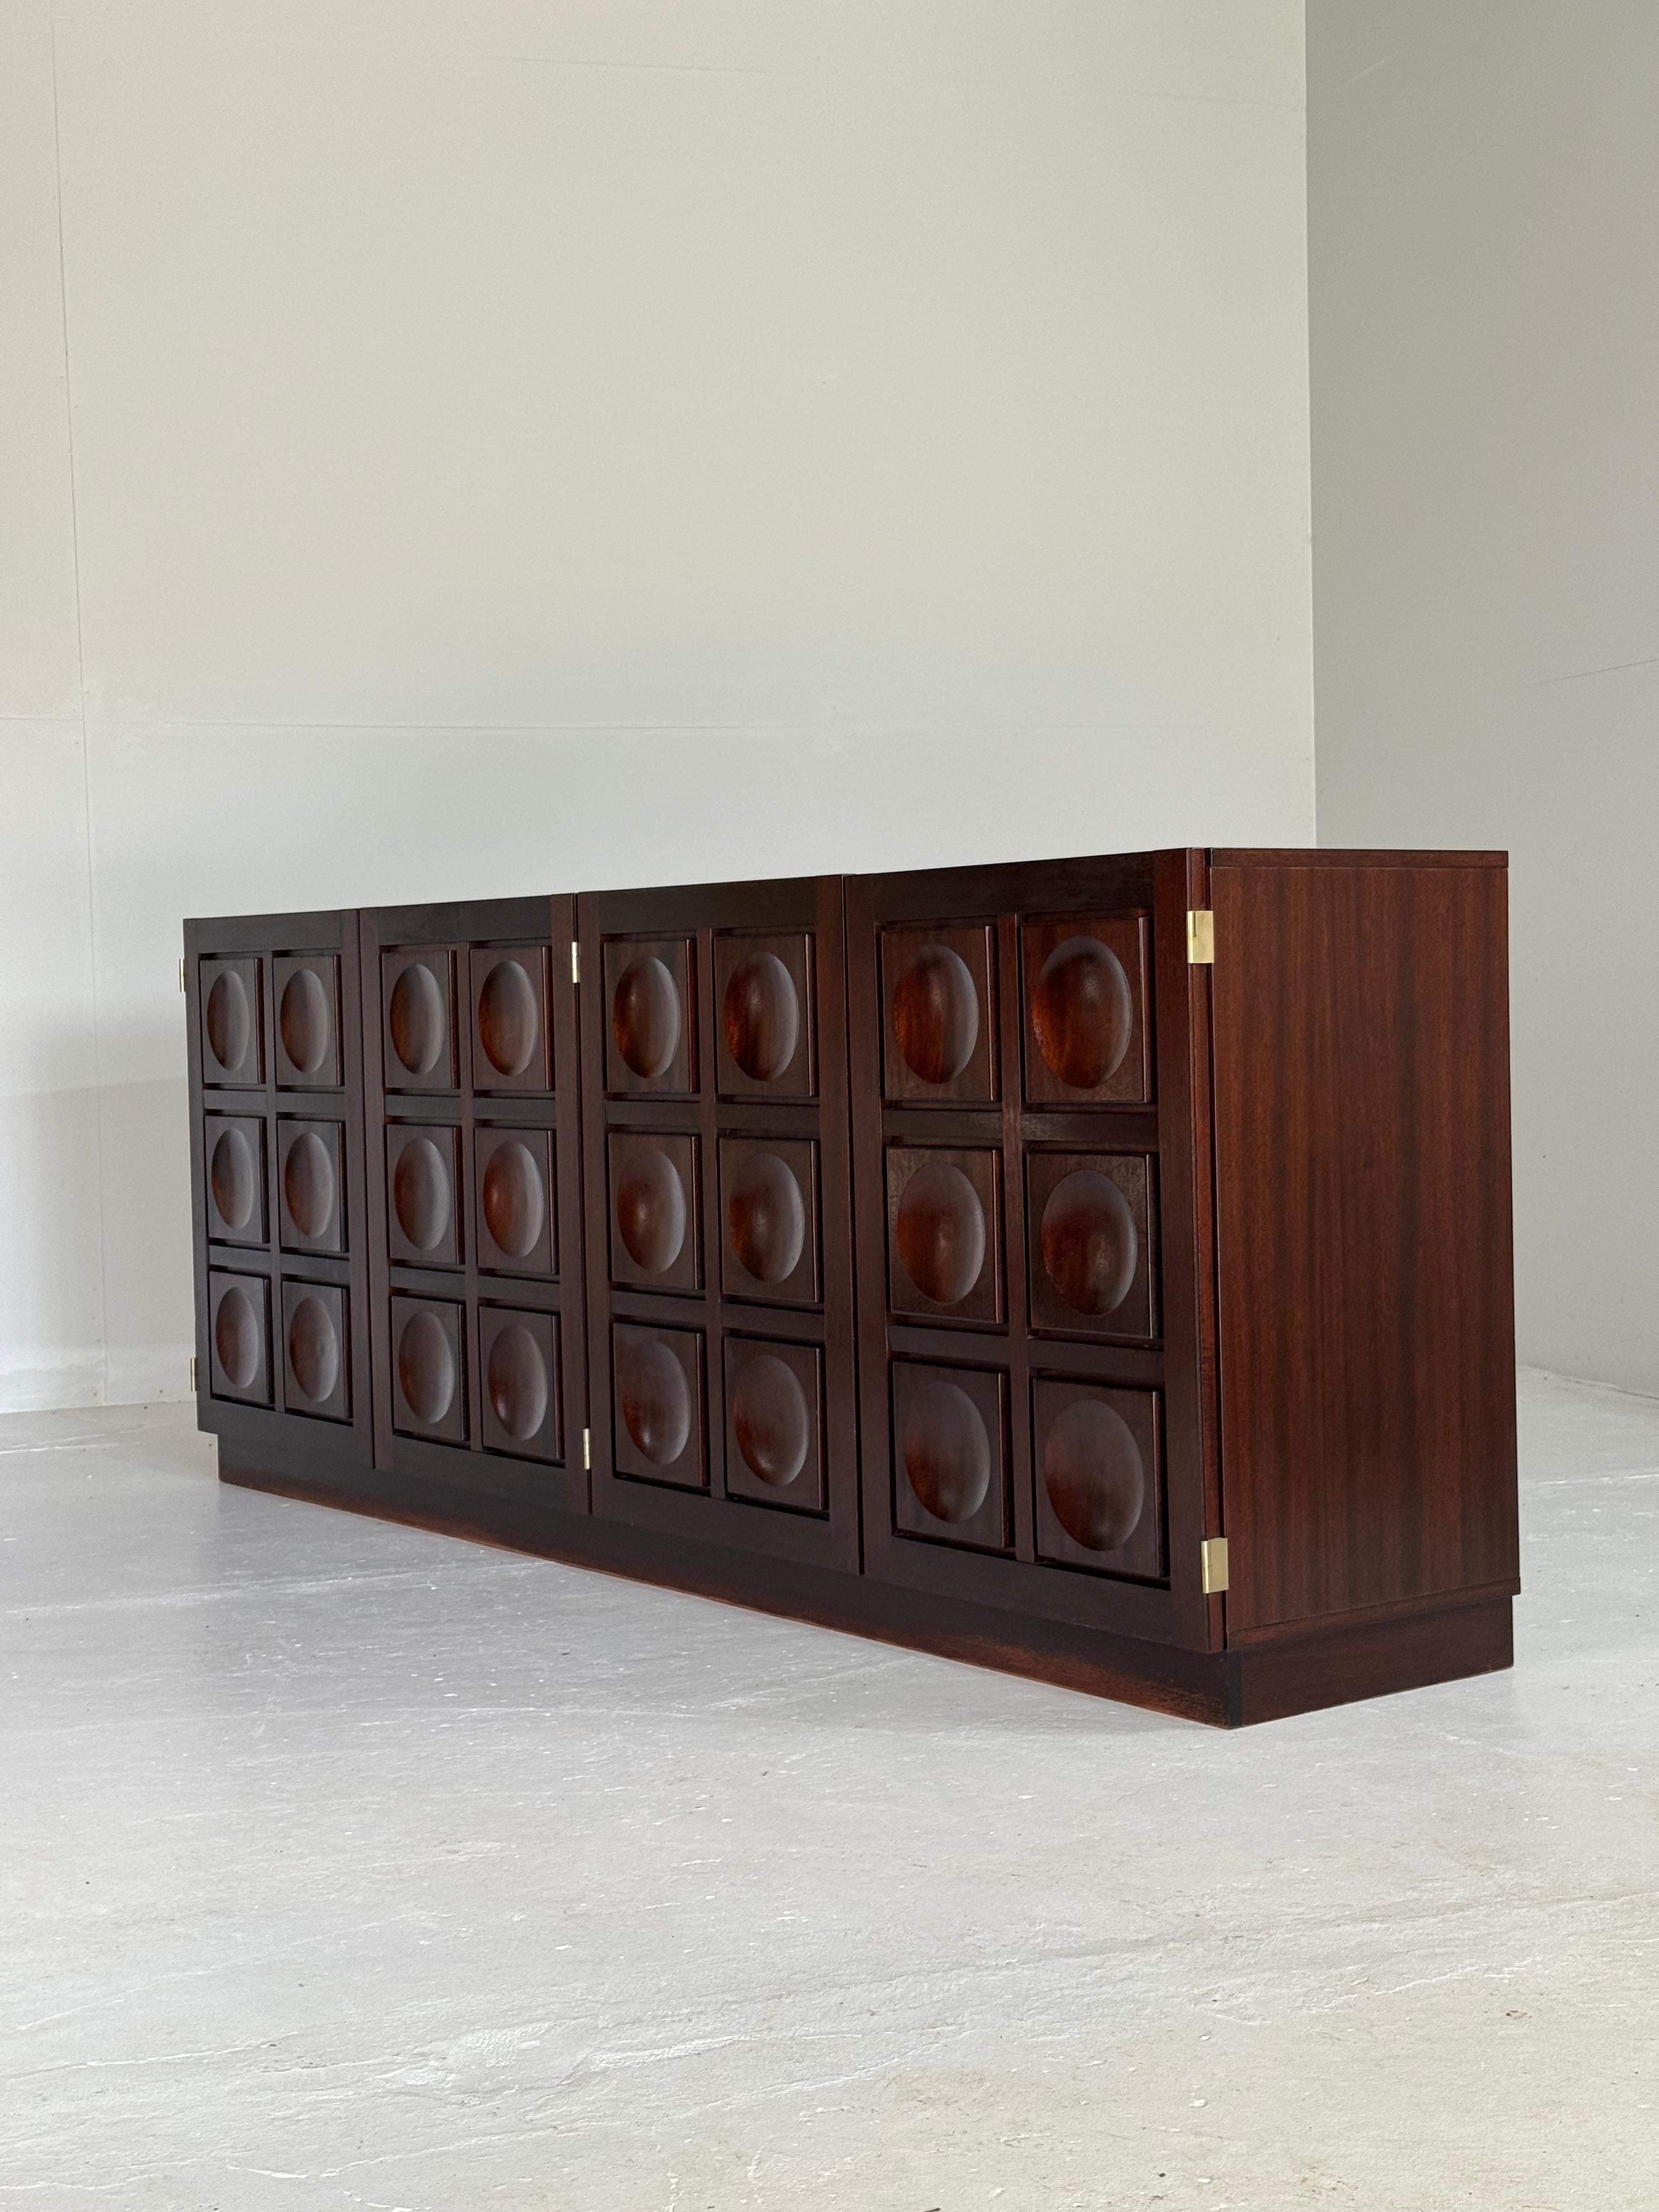 Sideboard/credenza in stained mahogany, belgium, 1970s.

It's a 4-door beauty made of rich, stained mahogany, and it's a true masterpiece of Belgian Brutalist design. The clean lines, minimal ornamentation, and sturdy construction all come together